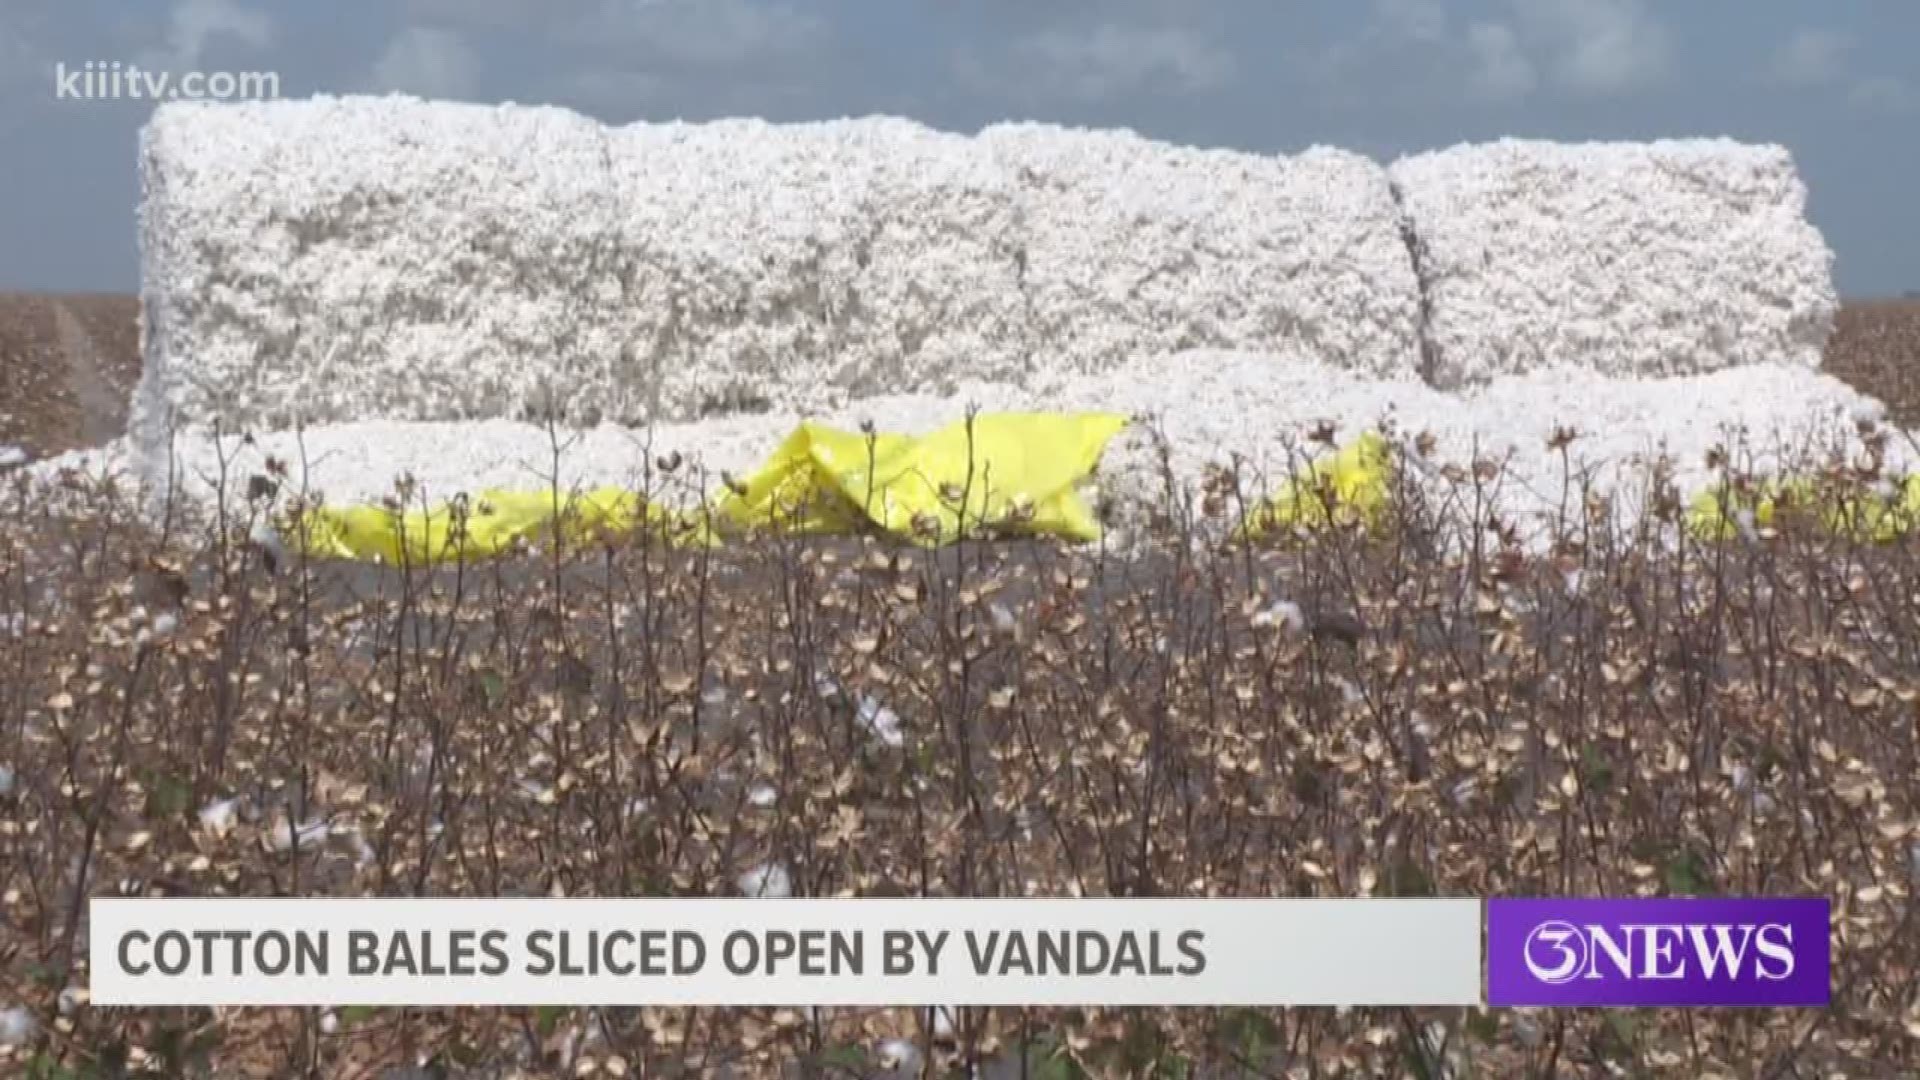 "We're not going to be able to recover all the cotton," Keeney said. "The cotton we will be able to recover is going to have sticks in it, dirt in it. Hoing to lower the grade."